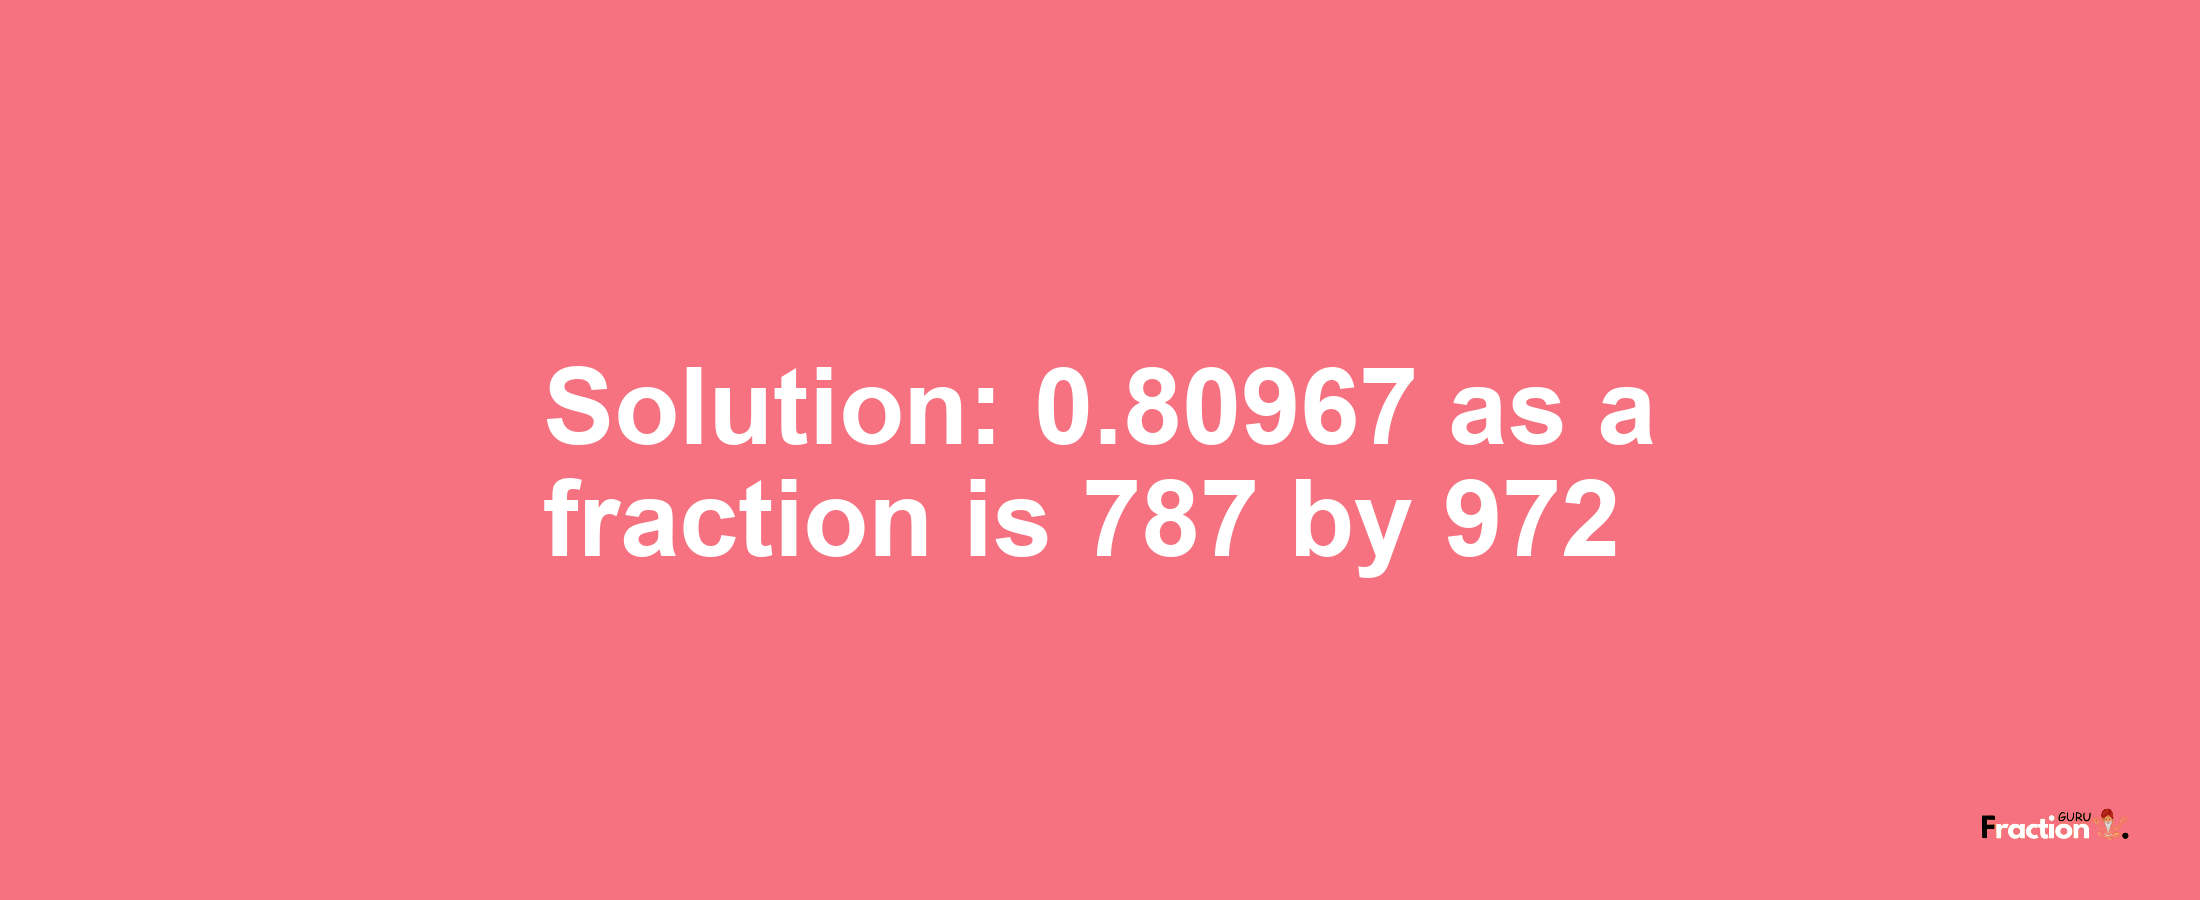 Solution:0.80967 as a fraction is 787/972